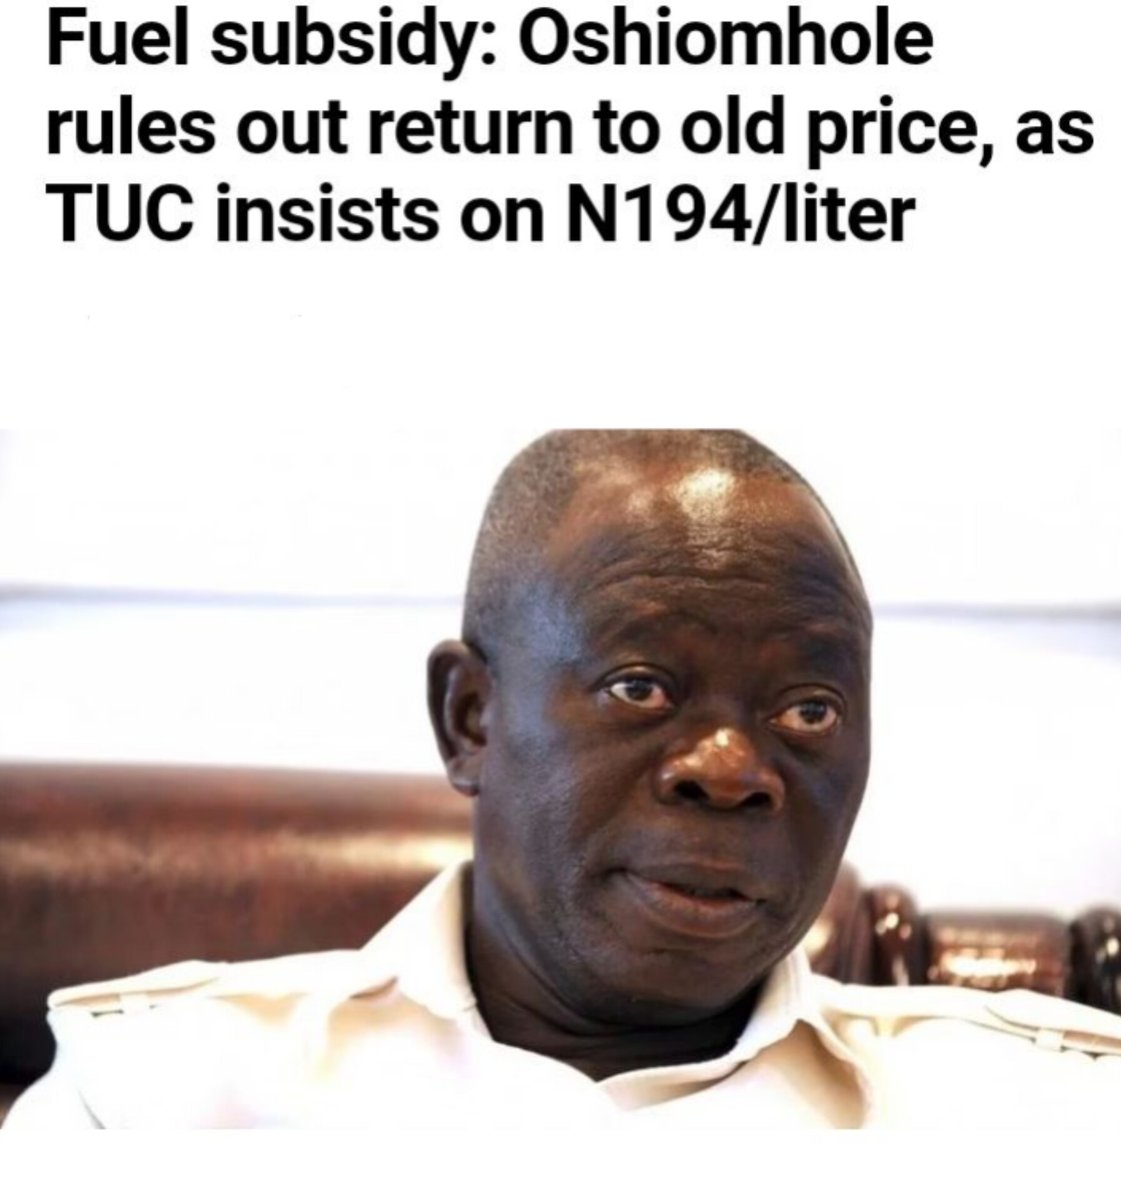 Former governor of Edo State and currently a Senator-elect, Adams Oshiomhole has ruled out the possibility of the Federal Government reversing the current Petroleum pump price from the N488 and N557 per litre to N194. #transformation #subsidy #FuelSubsidy